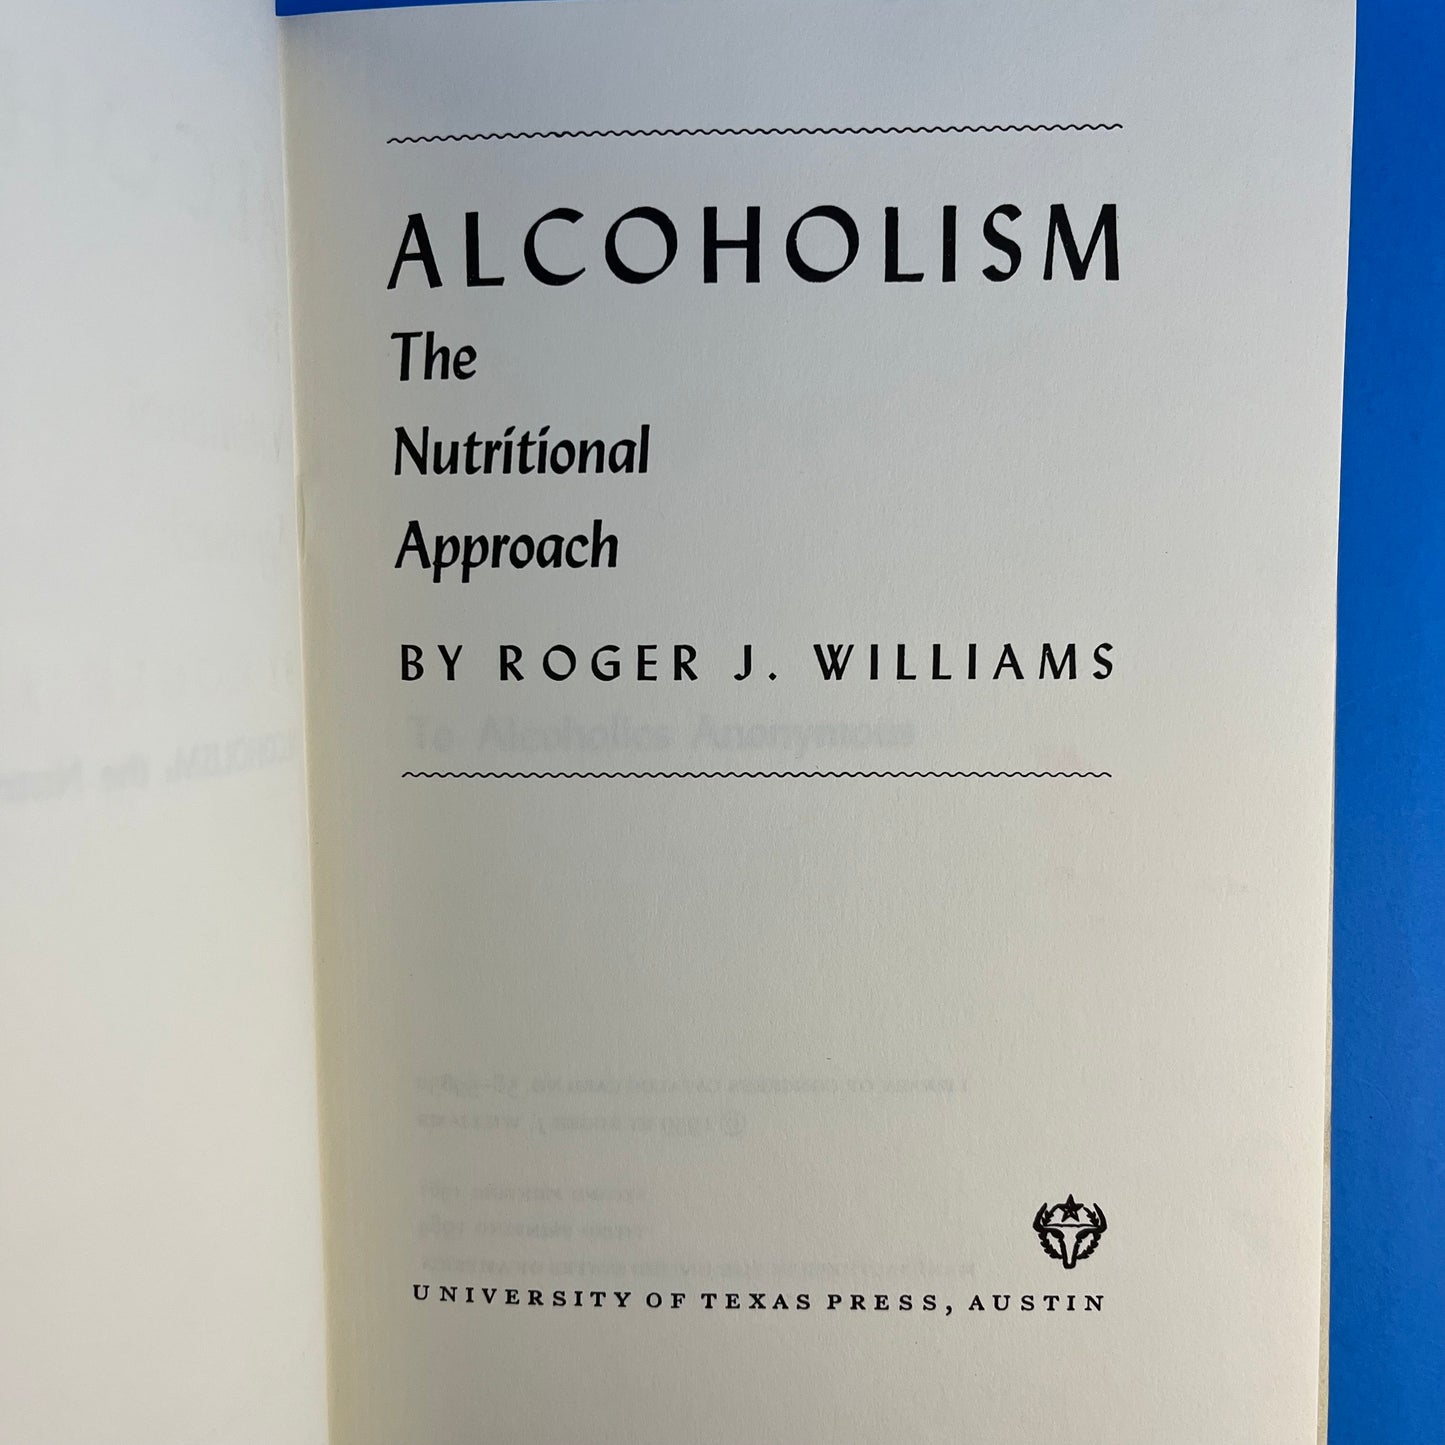 Alcoholism: The Nutritional Approach